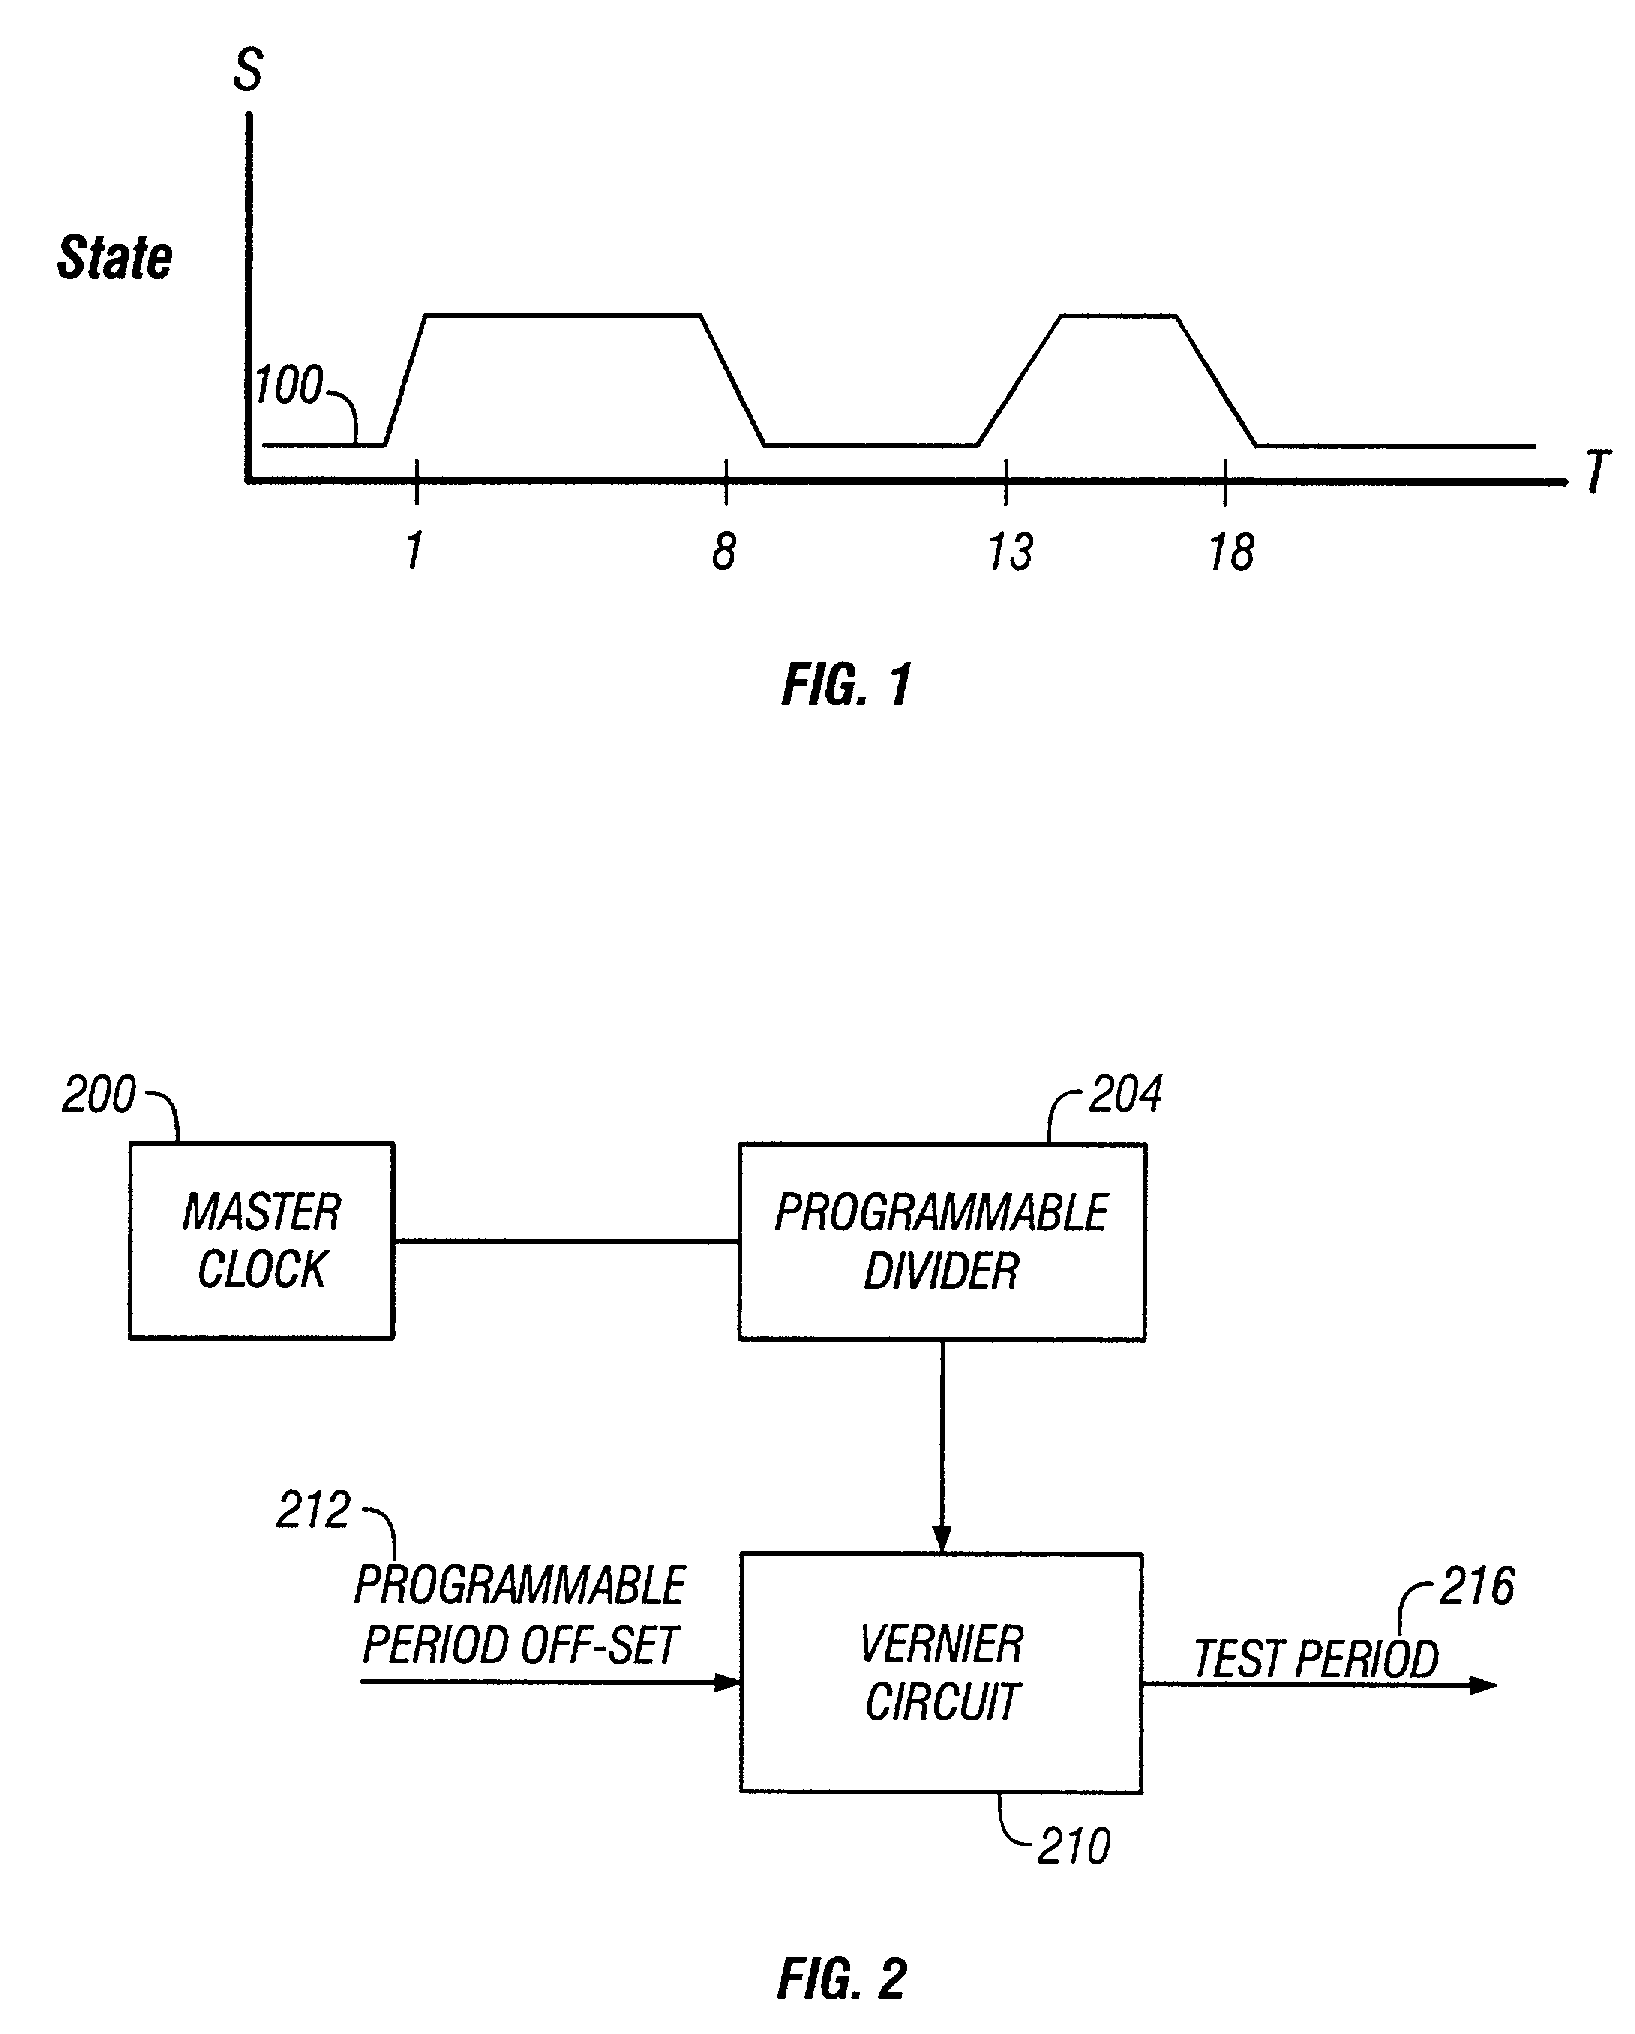 Low-jitter clock for test system